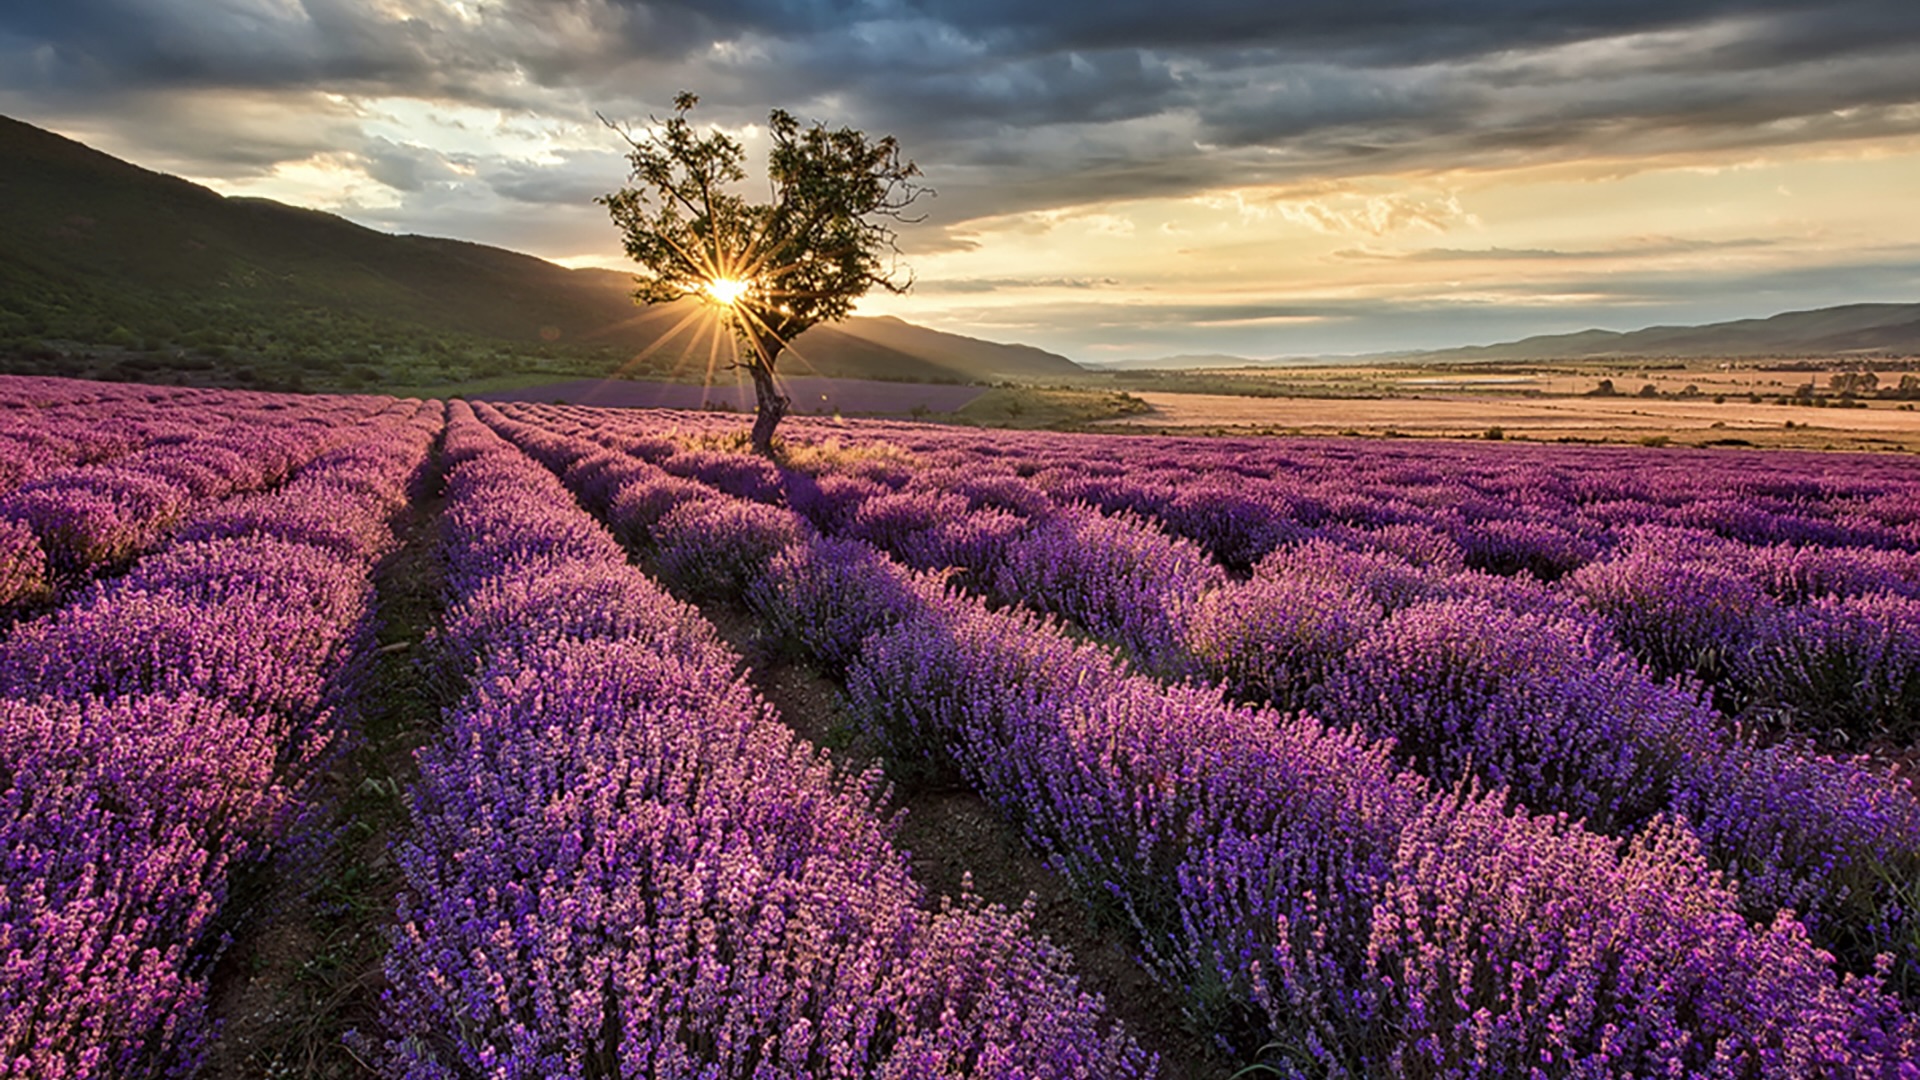 25 Licensing landscape photos you need to see